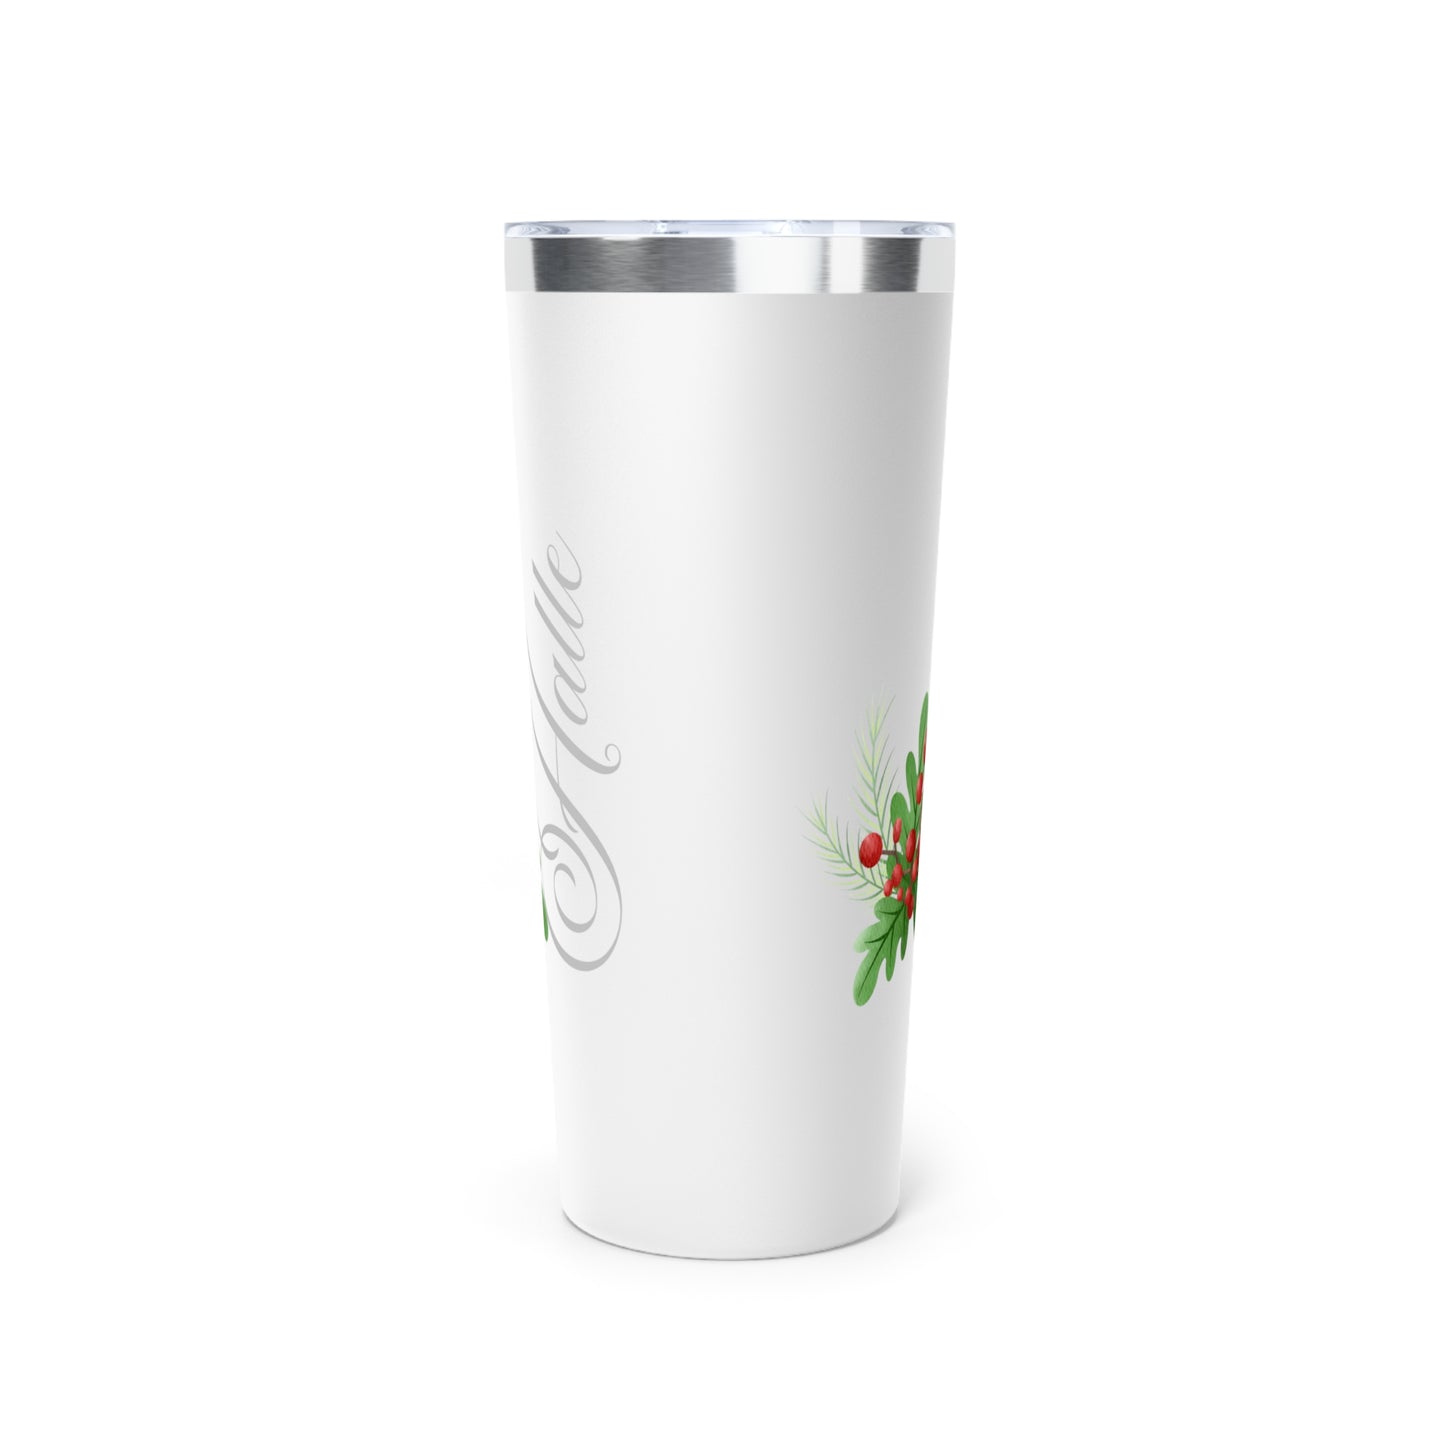 December Personalized Birth Flower Tumbler, Personalized Birth Flower Coffee Cup With Name, Gifts for Her, Bridesmaid Proposal, Party Favor